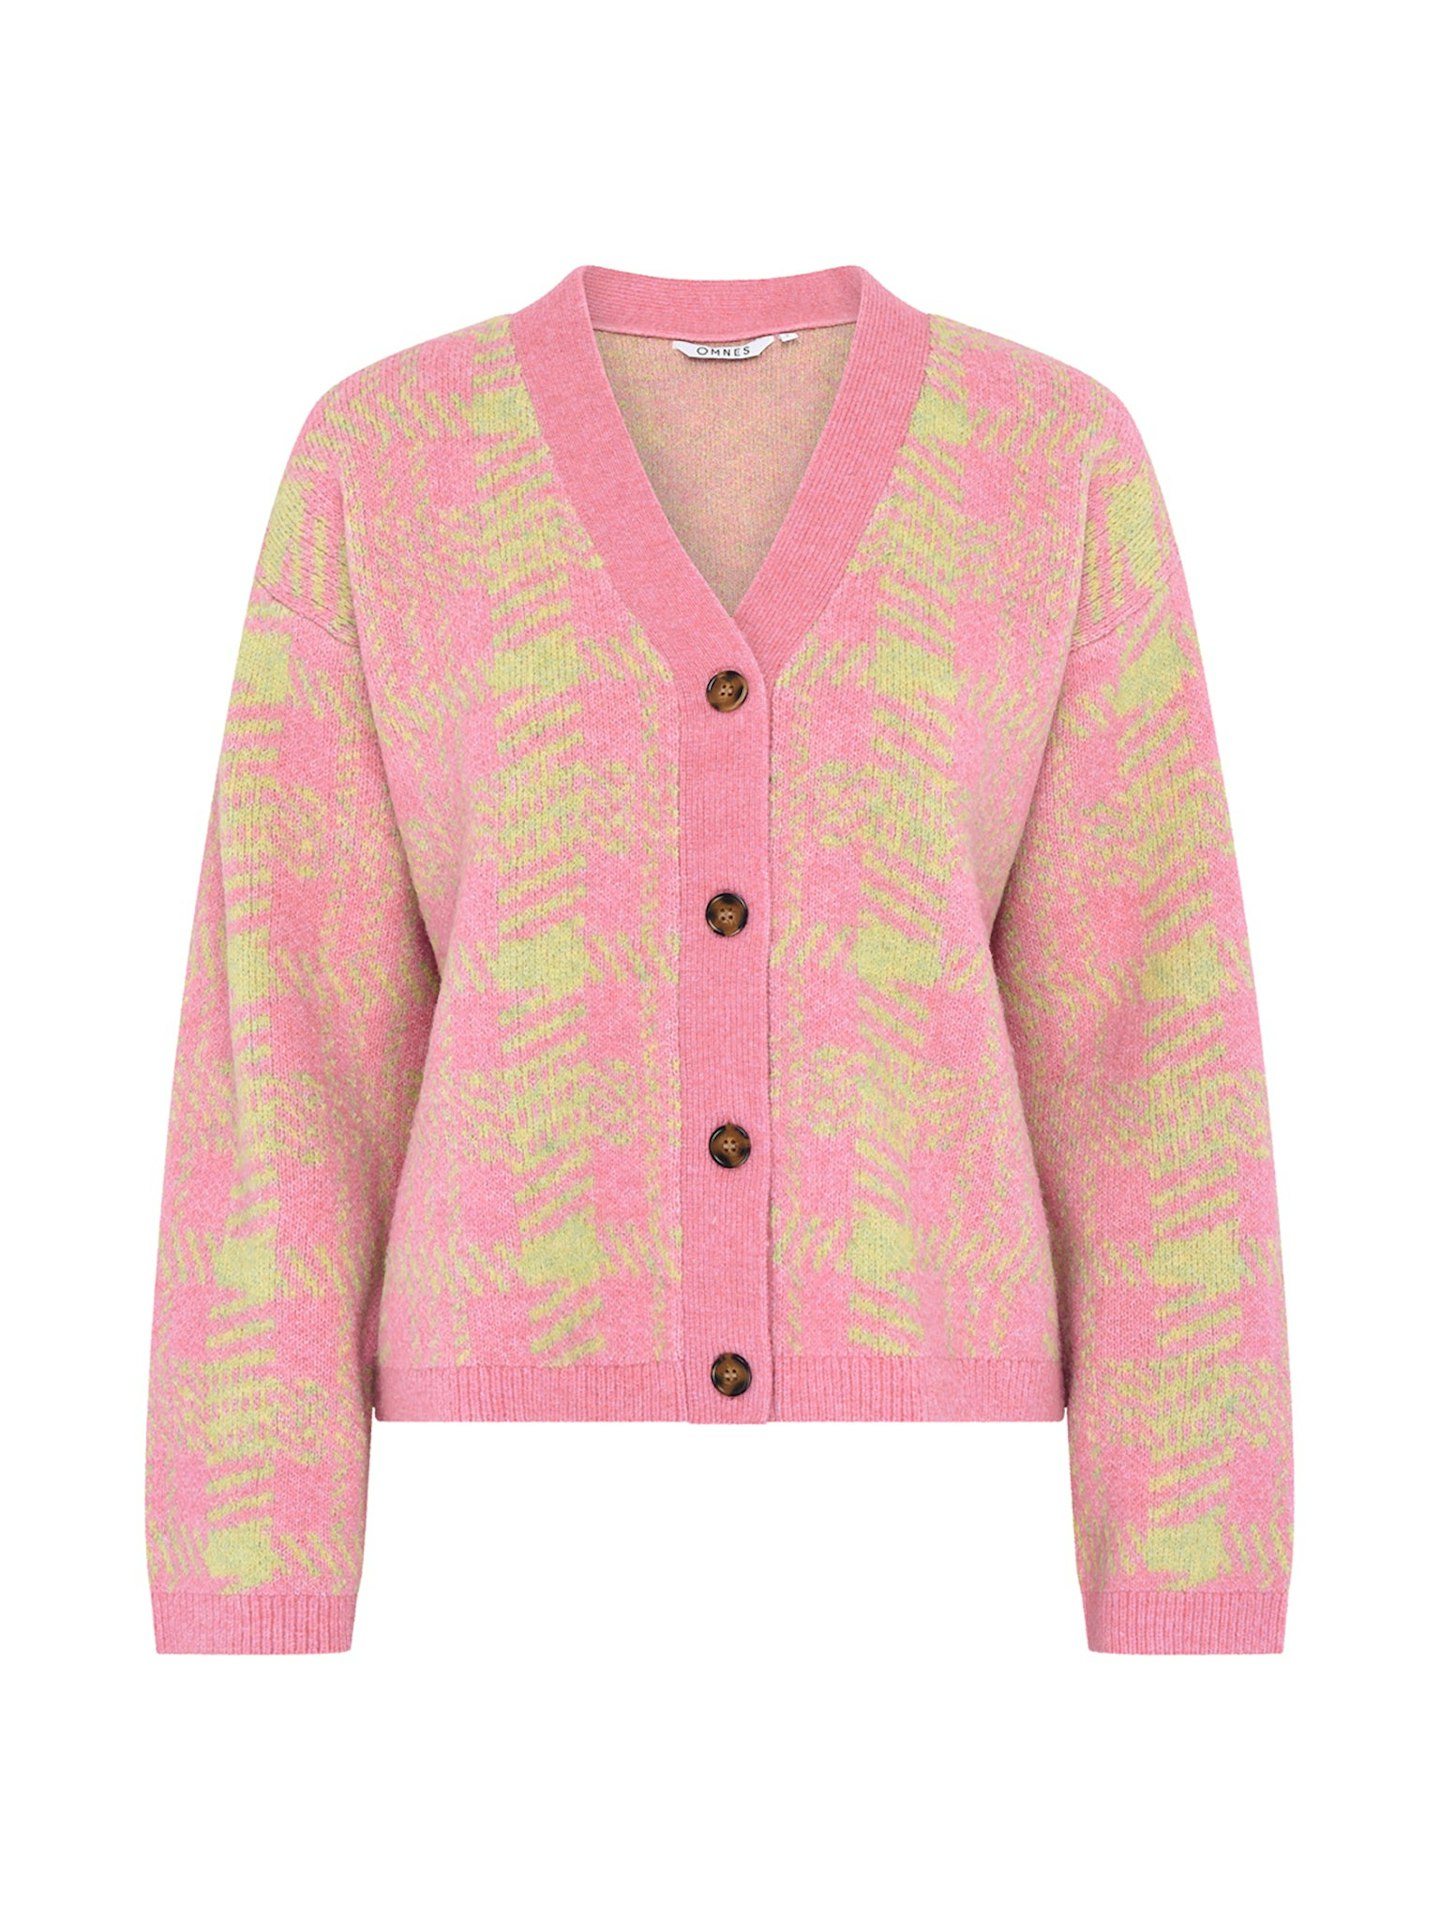 Omnes pink and lime green check cardigan